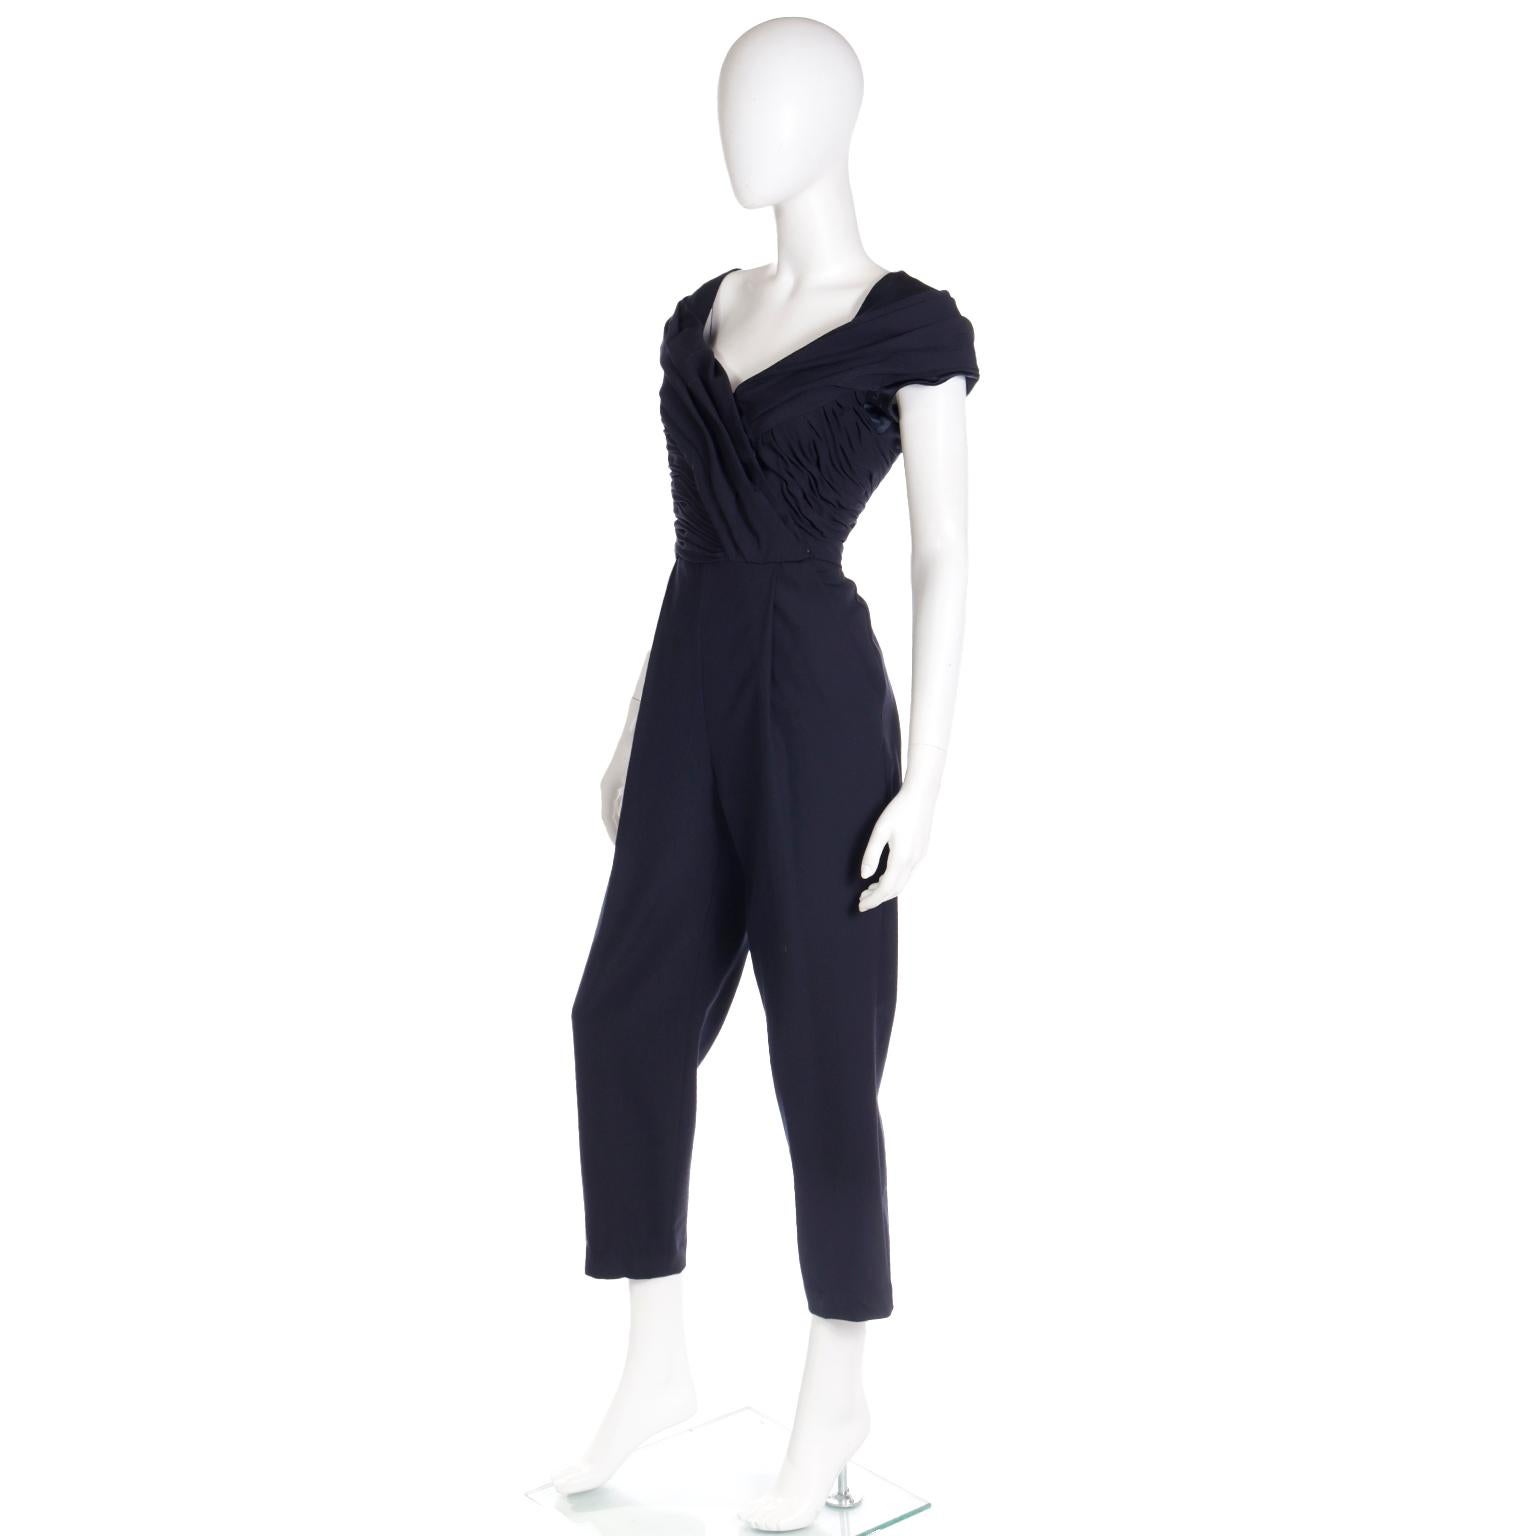 Gianni Versace Couture 1990 Vintage Black Jumpsuit With Ruching  In Excellent Condition For Sale In Portland, OR